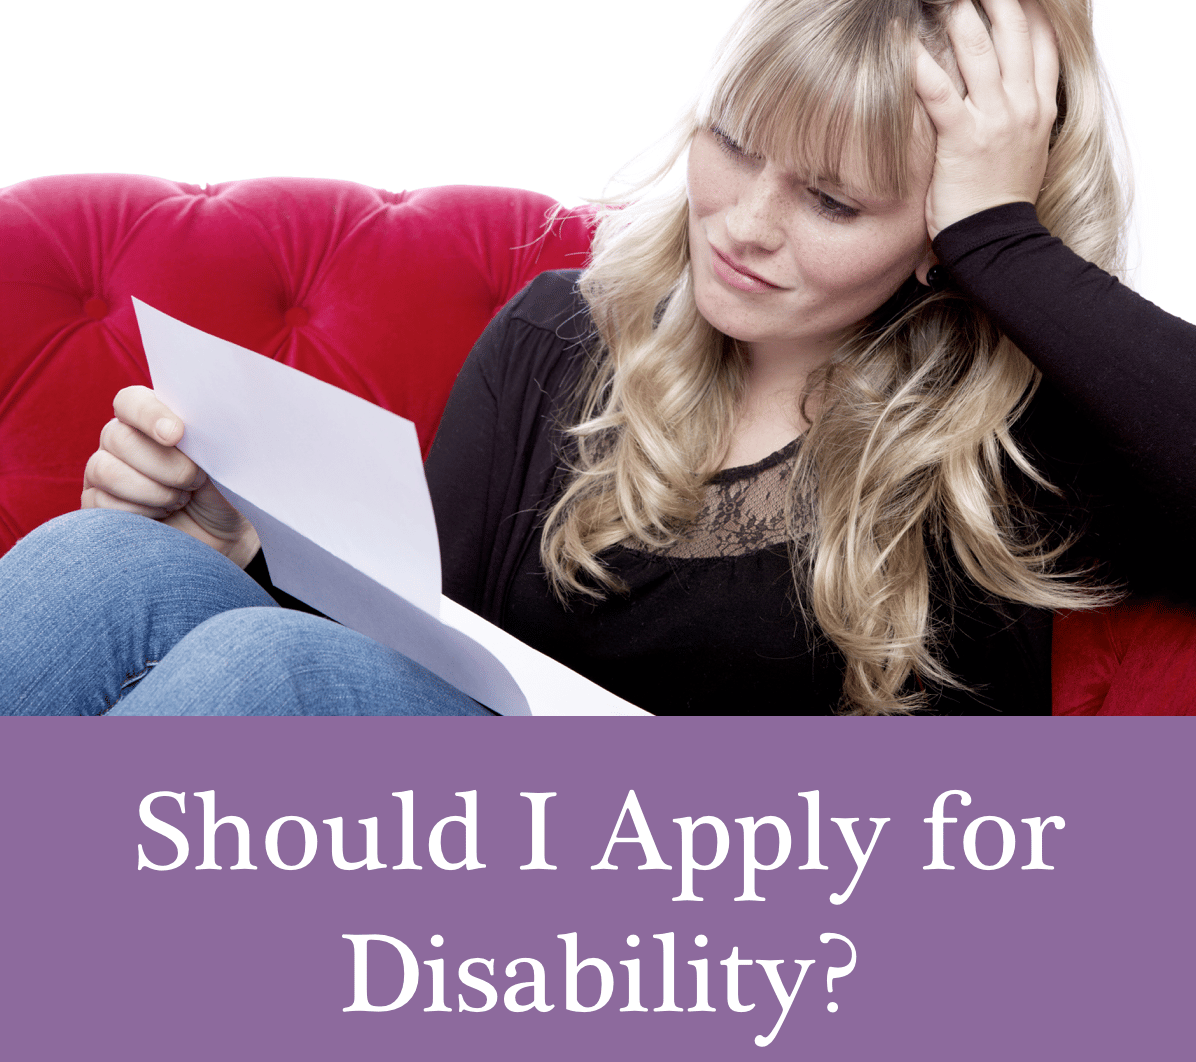 Should You Apply for Social Security Disability Disability?